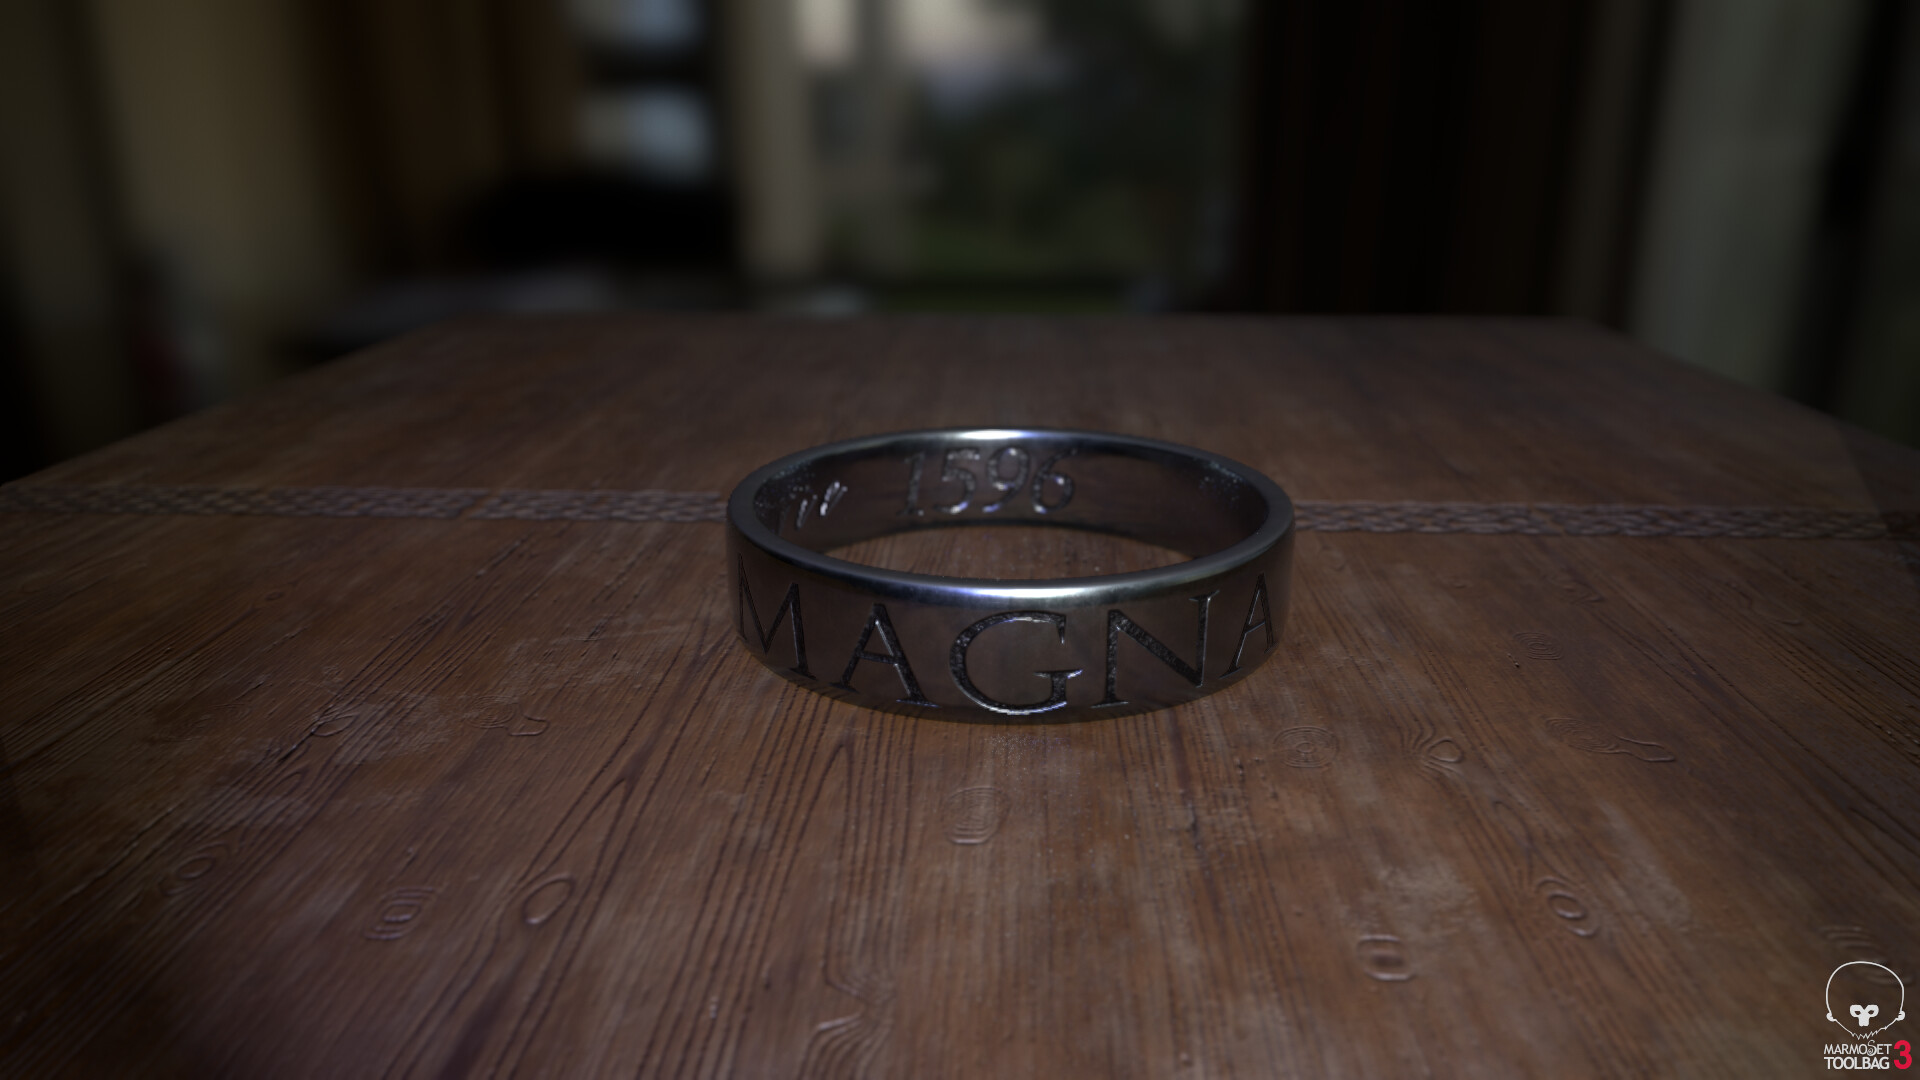 Uncharted Sic Parvis Magna Drake Adjustable Ring Necklace Pendant | eBay